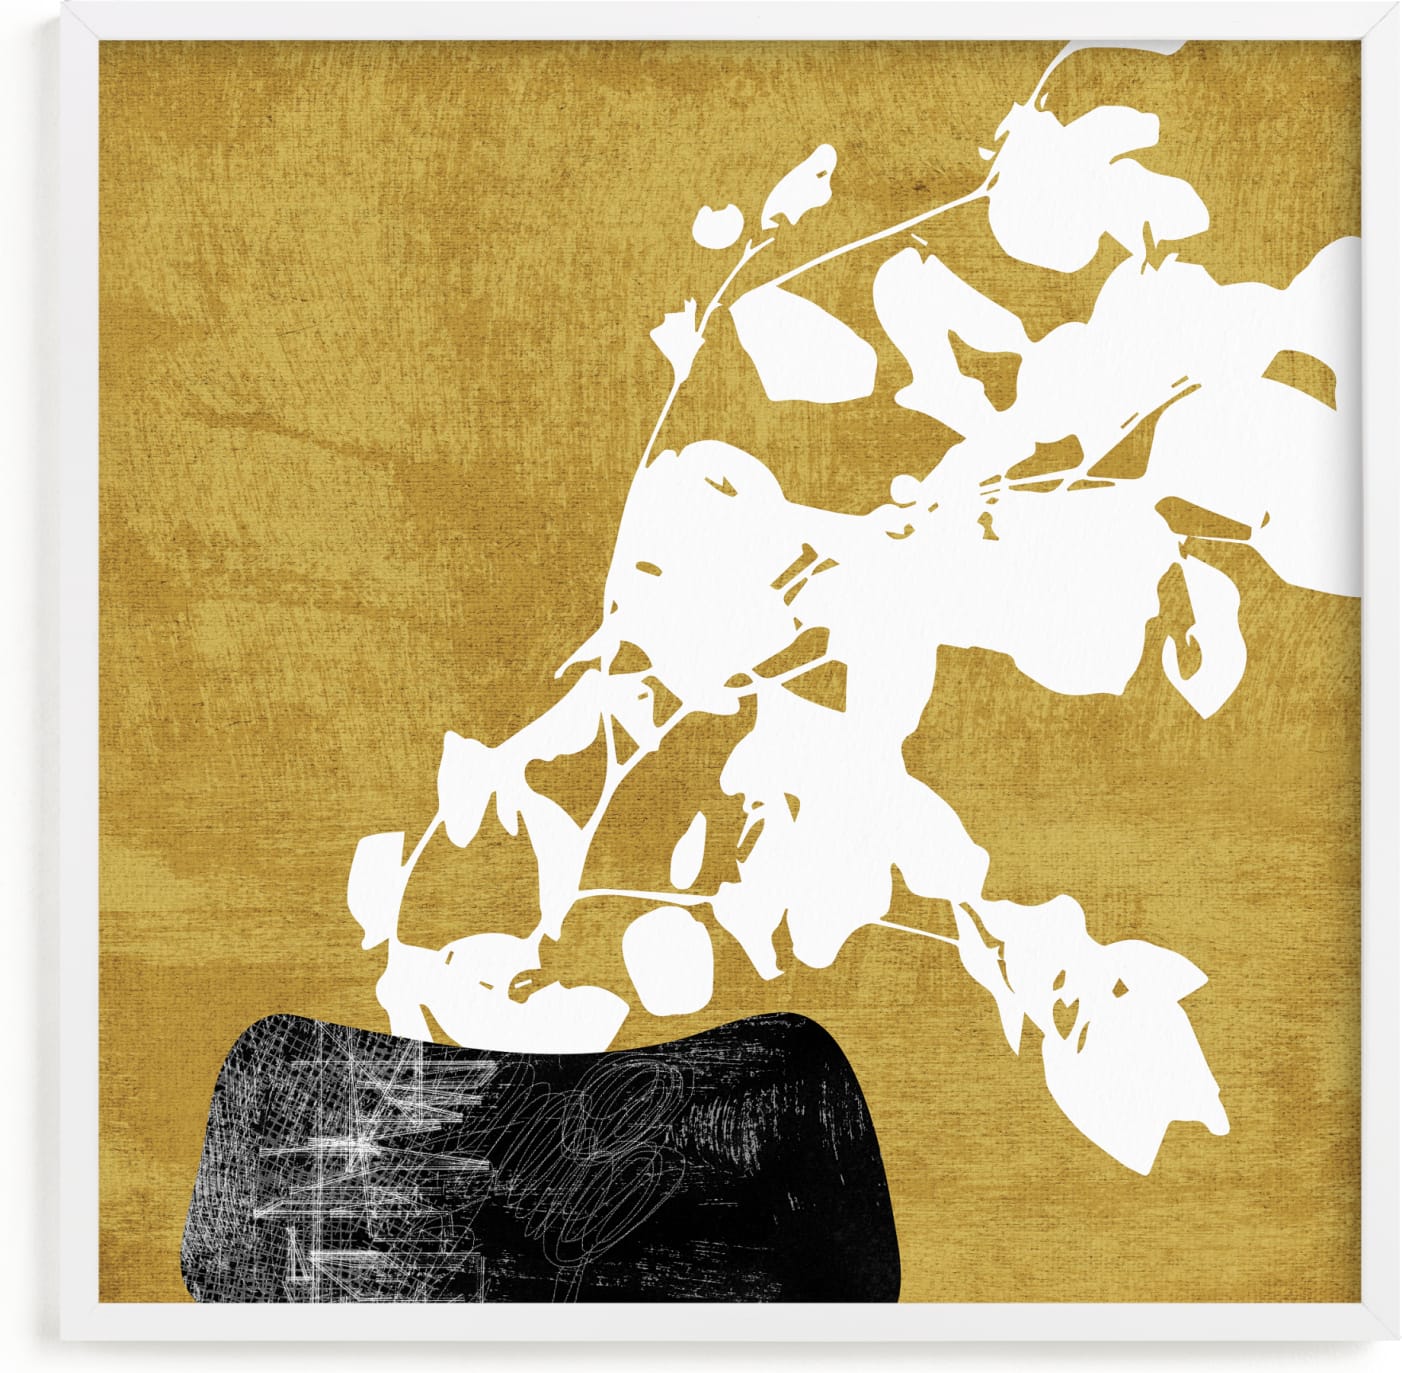 This is a white art by Tanya Lee Design called Ochre Eucalyptus III.